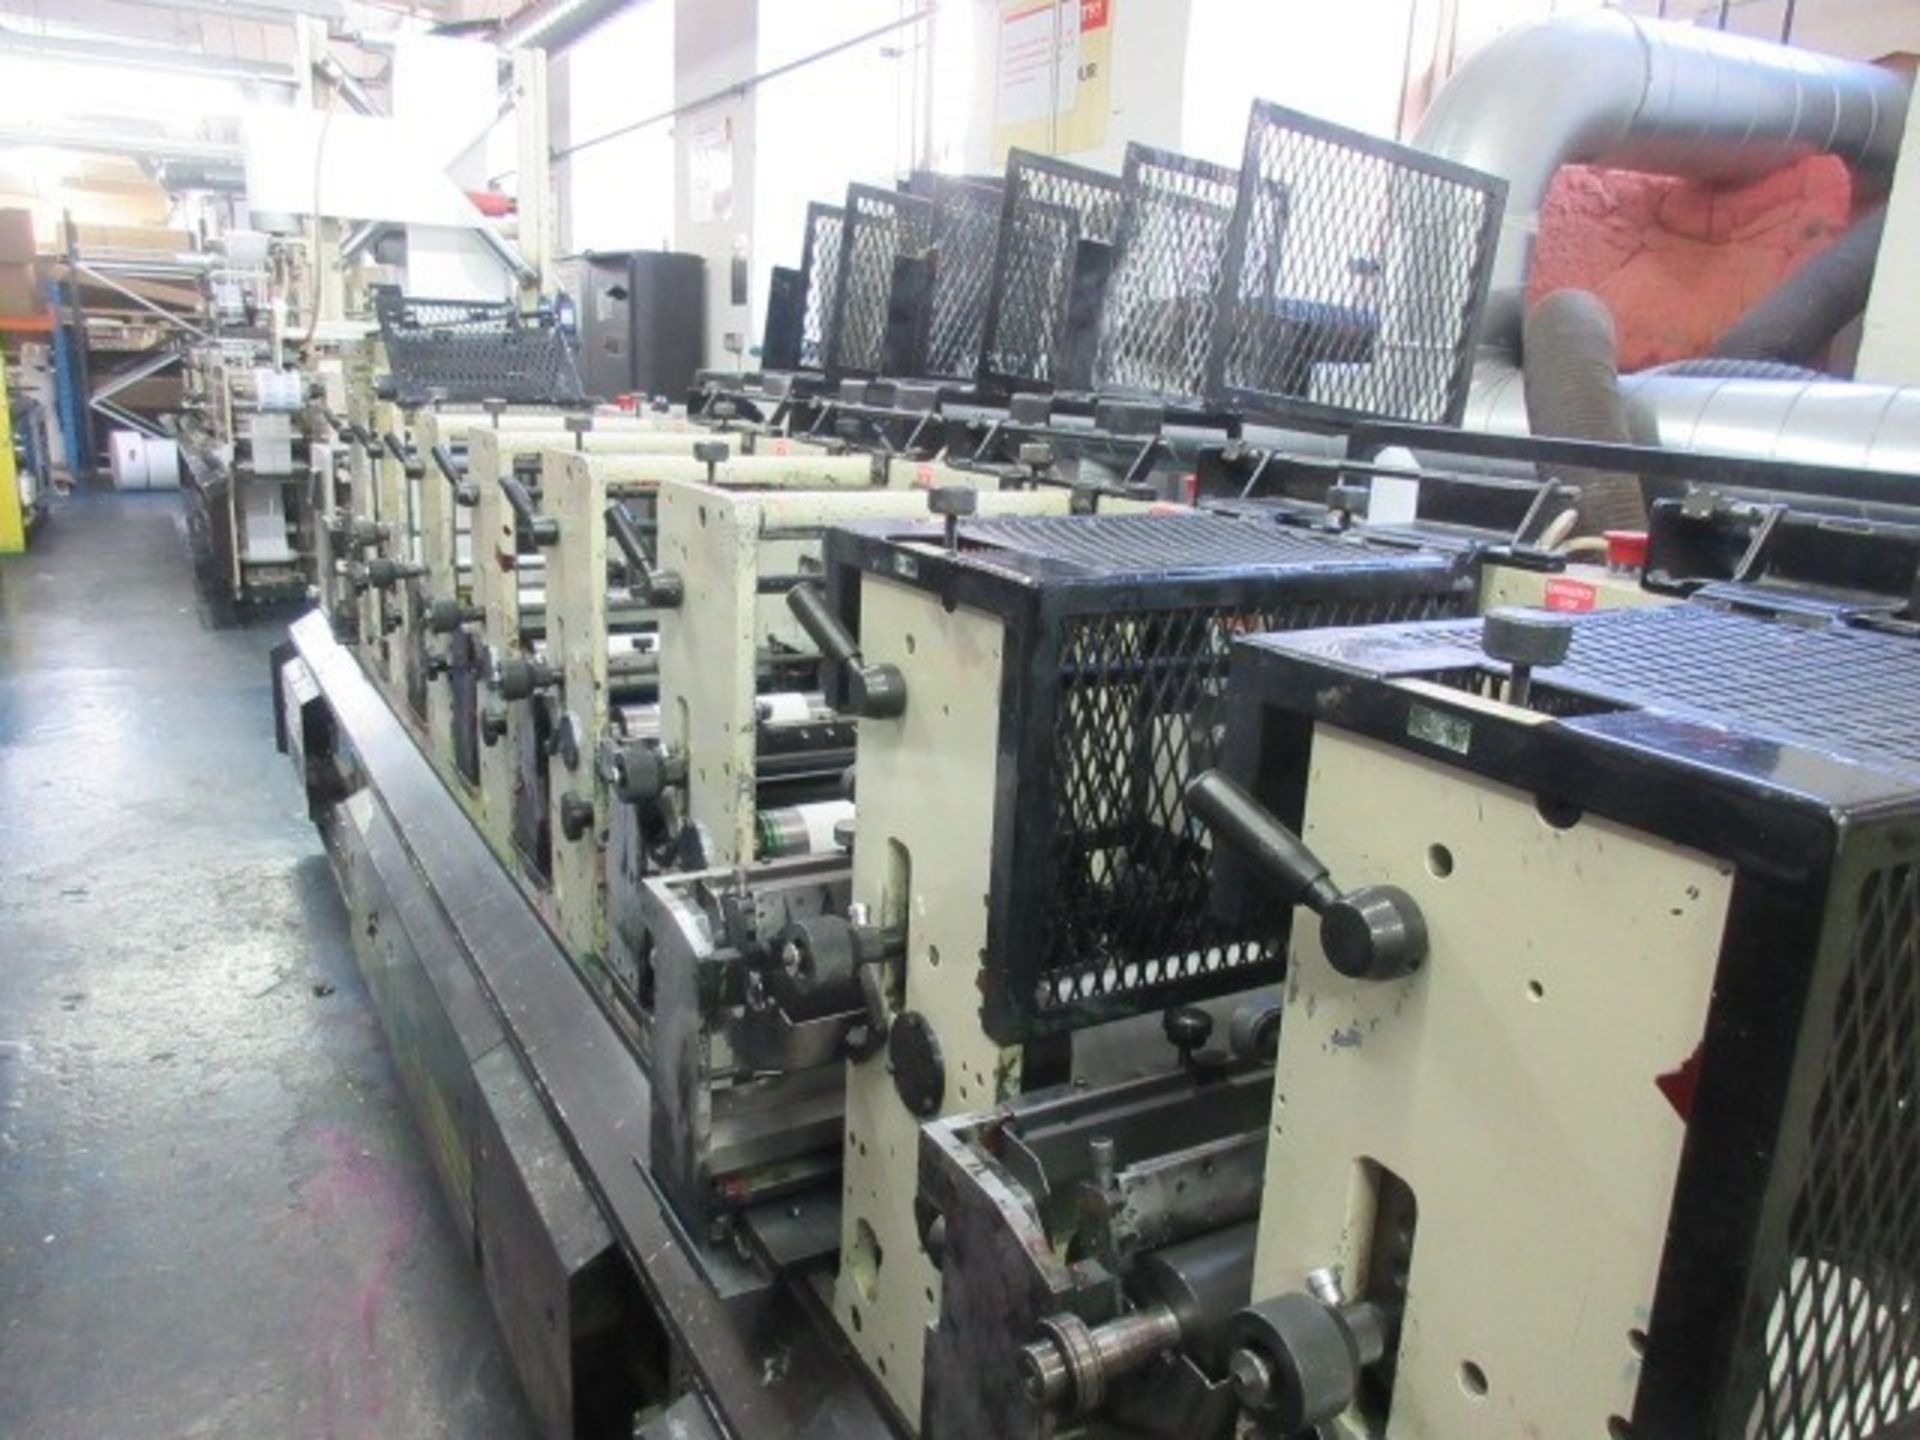 Mark Andy 2200-10F 10” 8 colour flexographic label printing press. Serial no: 1260086 (2002) - Image 71 of 383